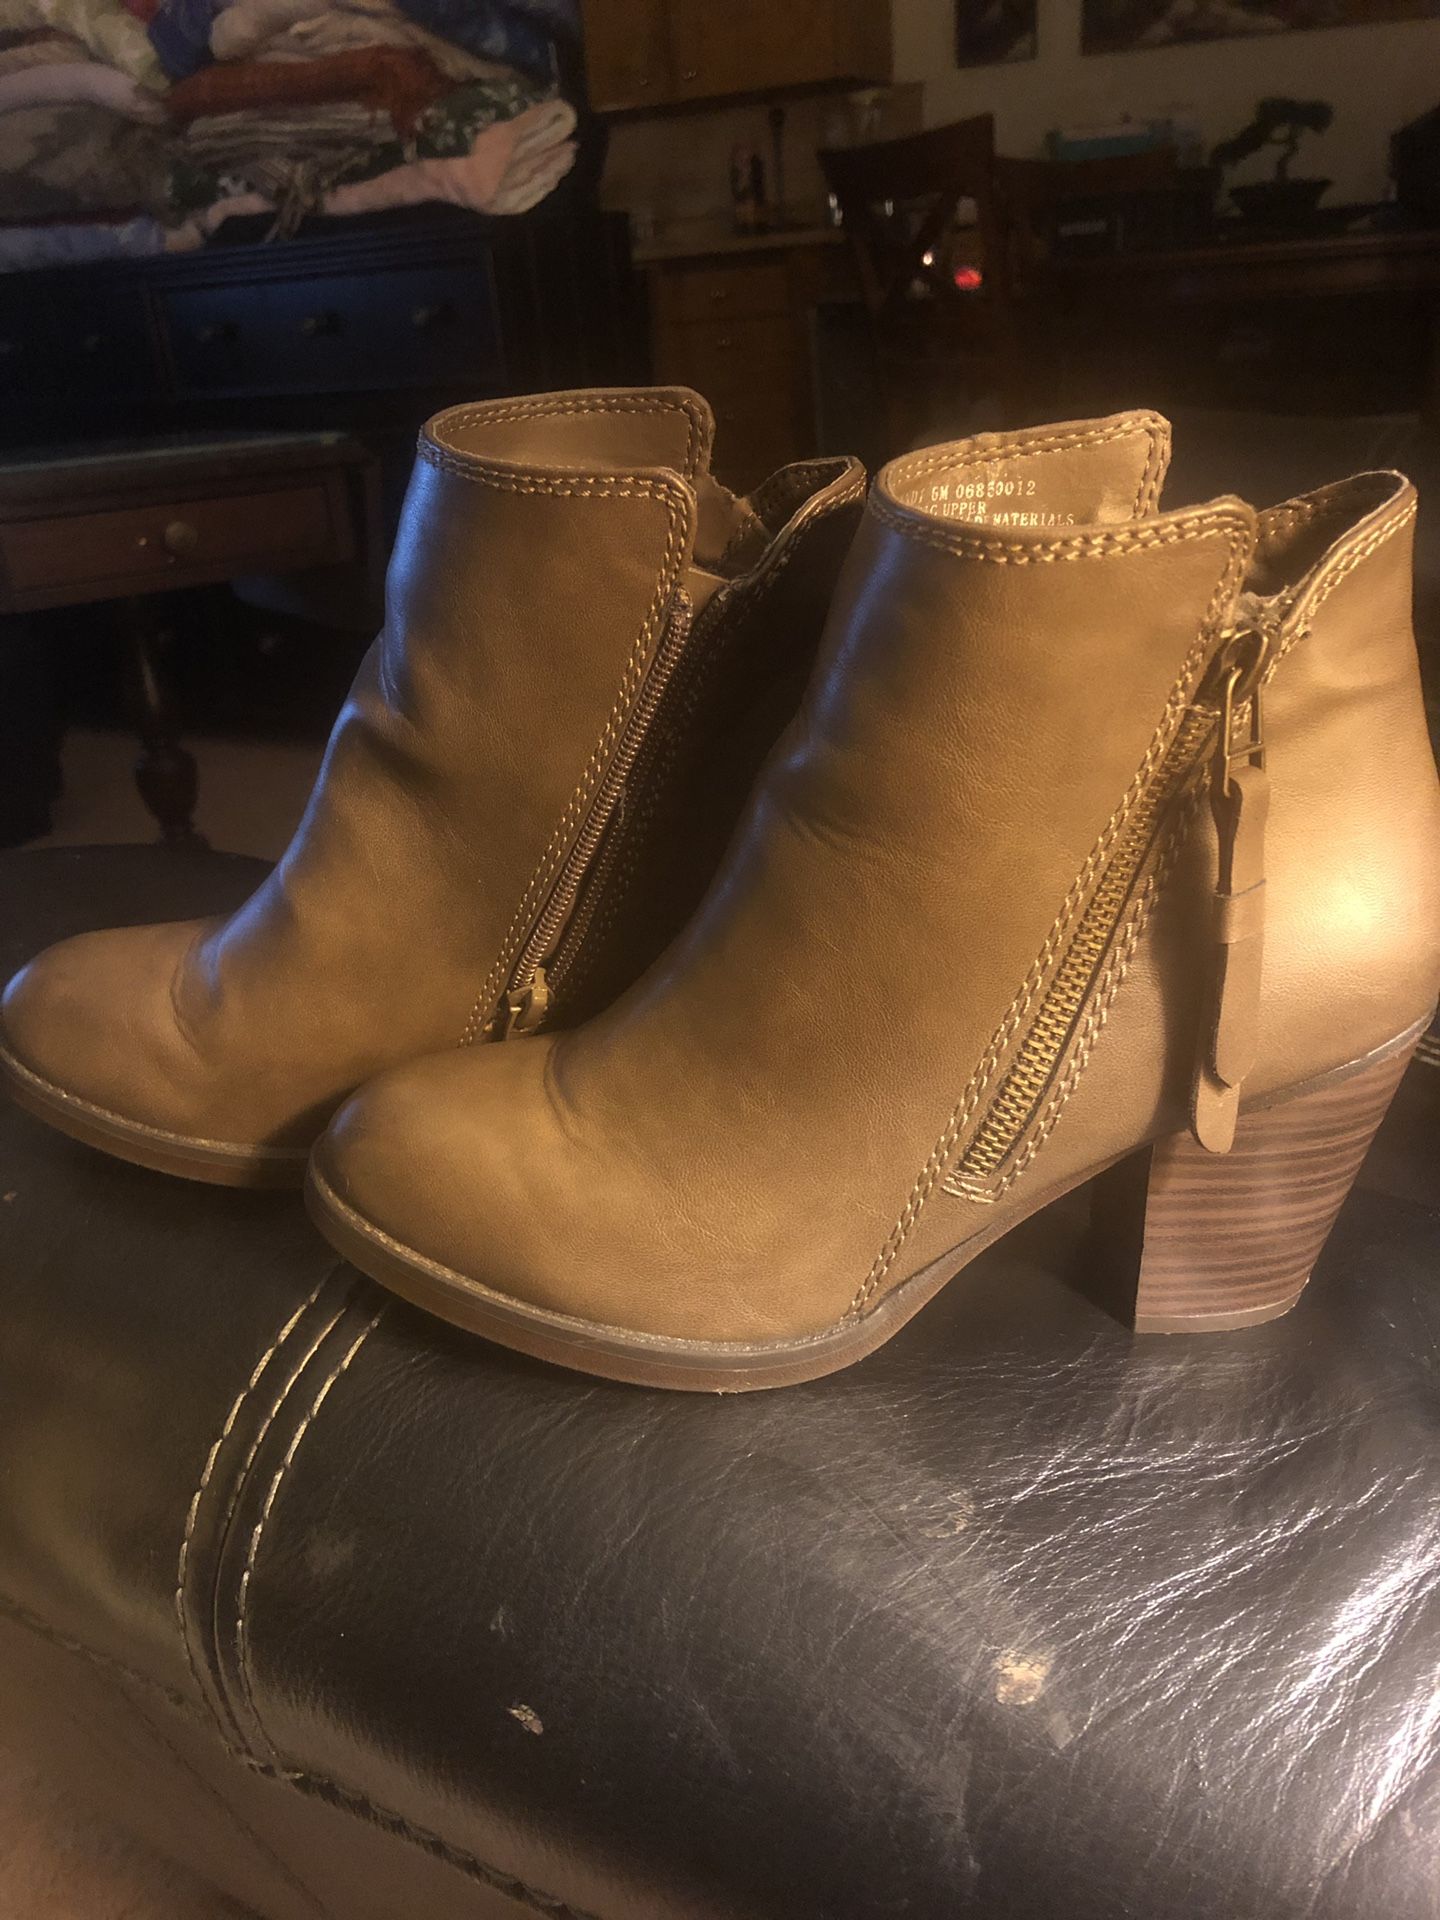 Women’s size 6 boots